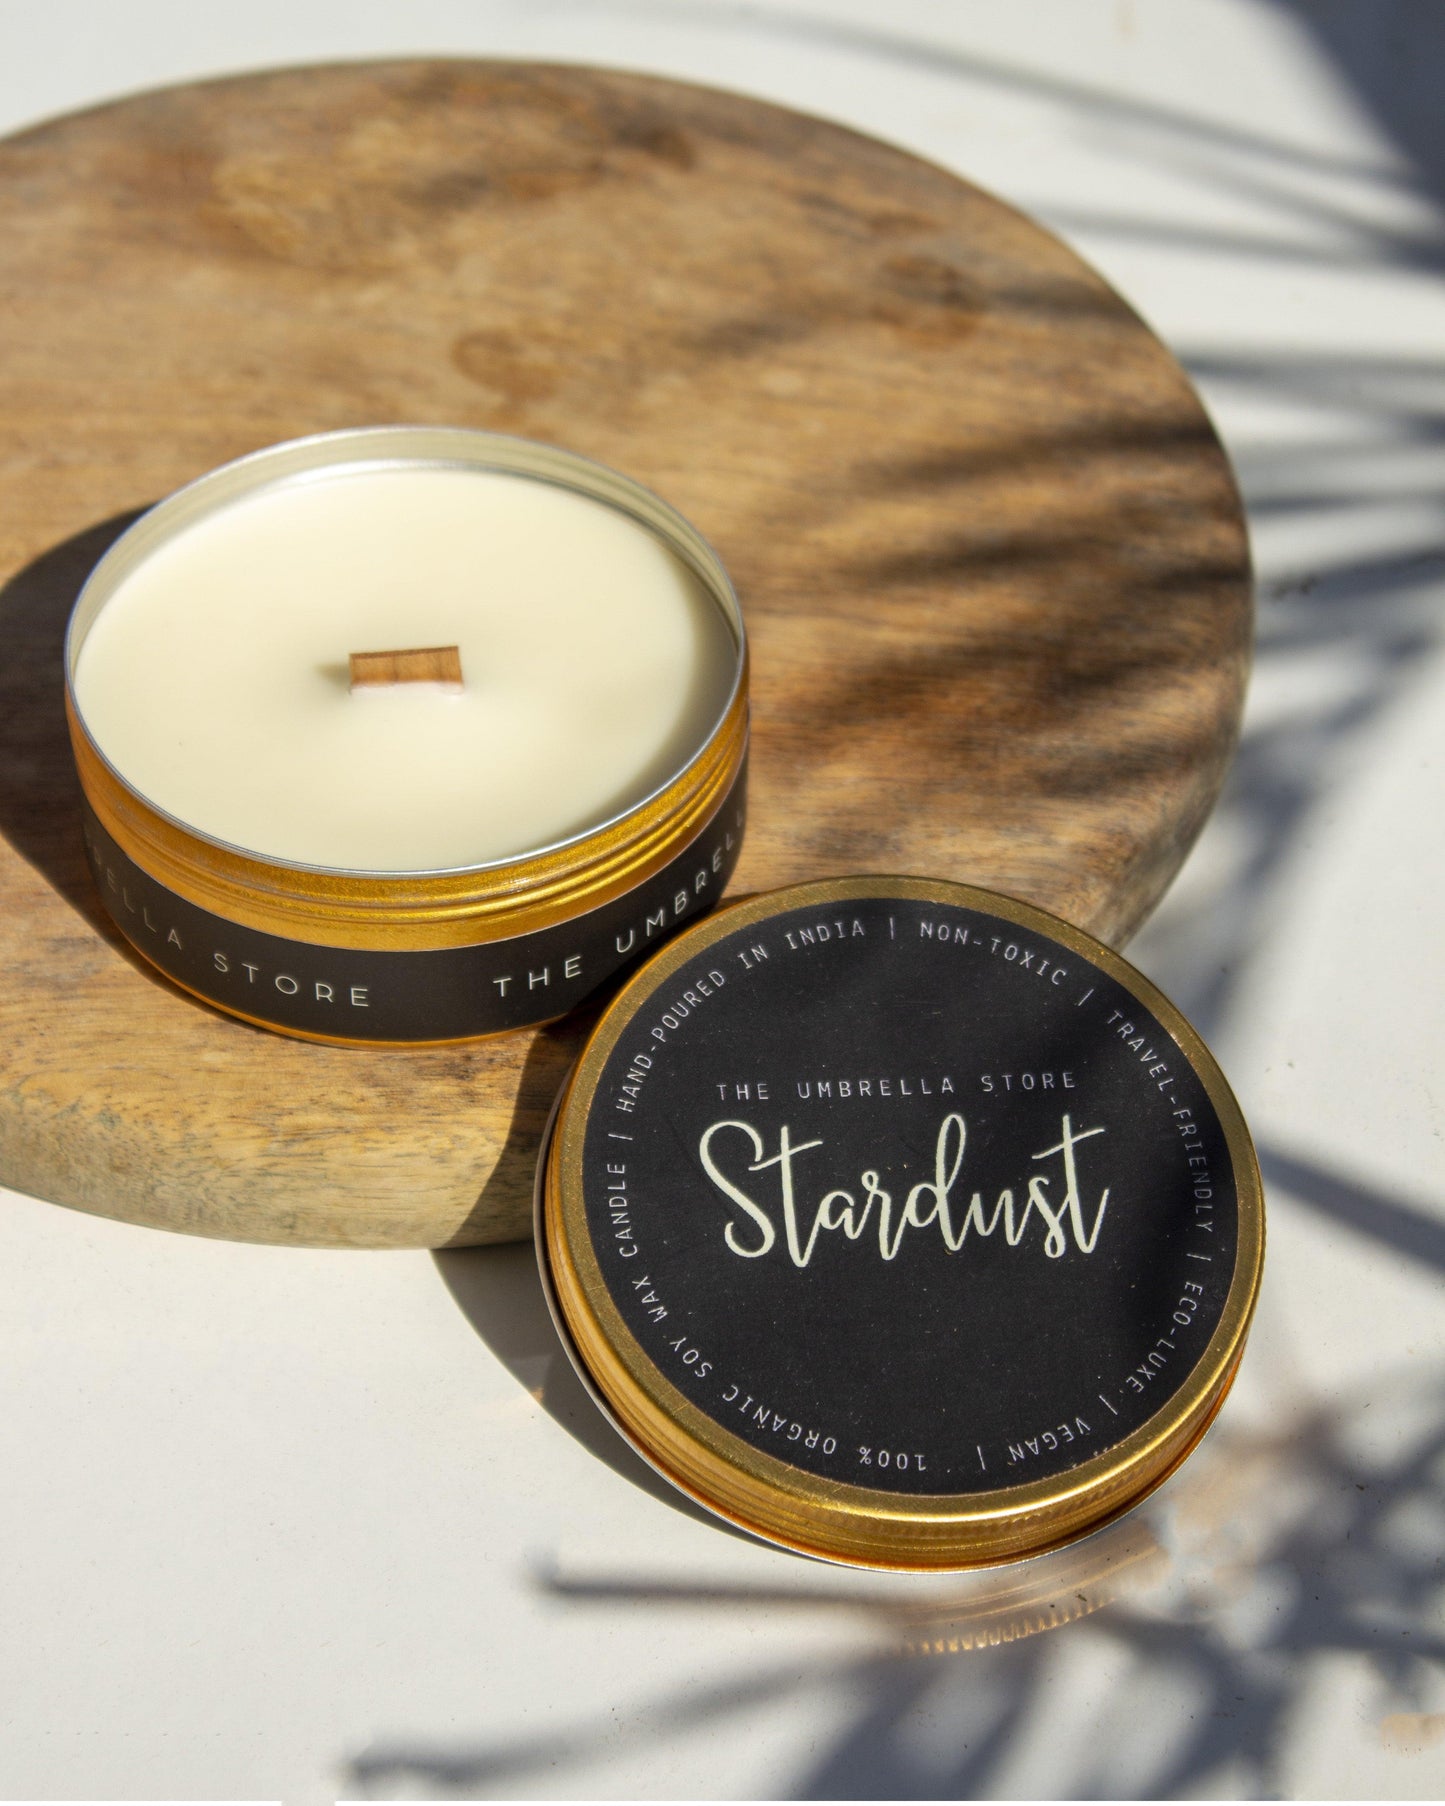 Stardust scented candle - The Umbrella store